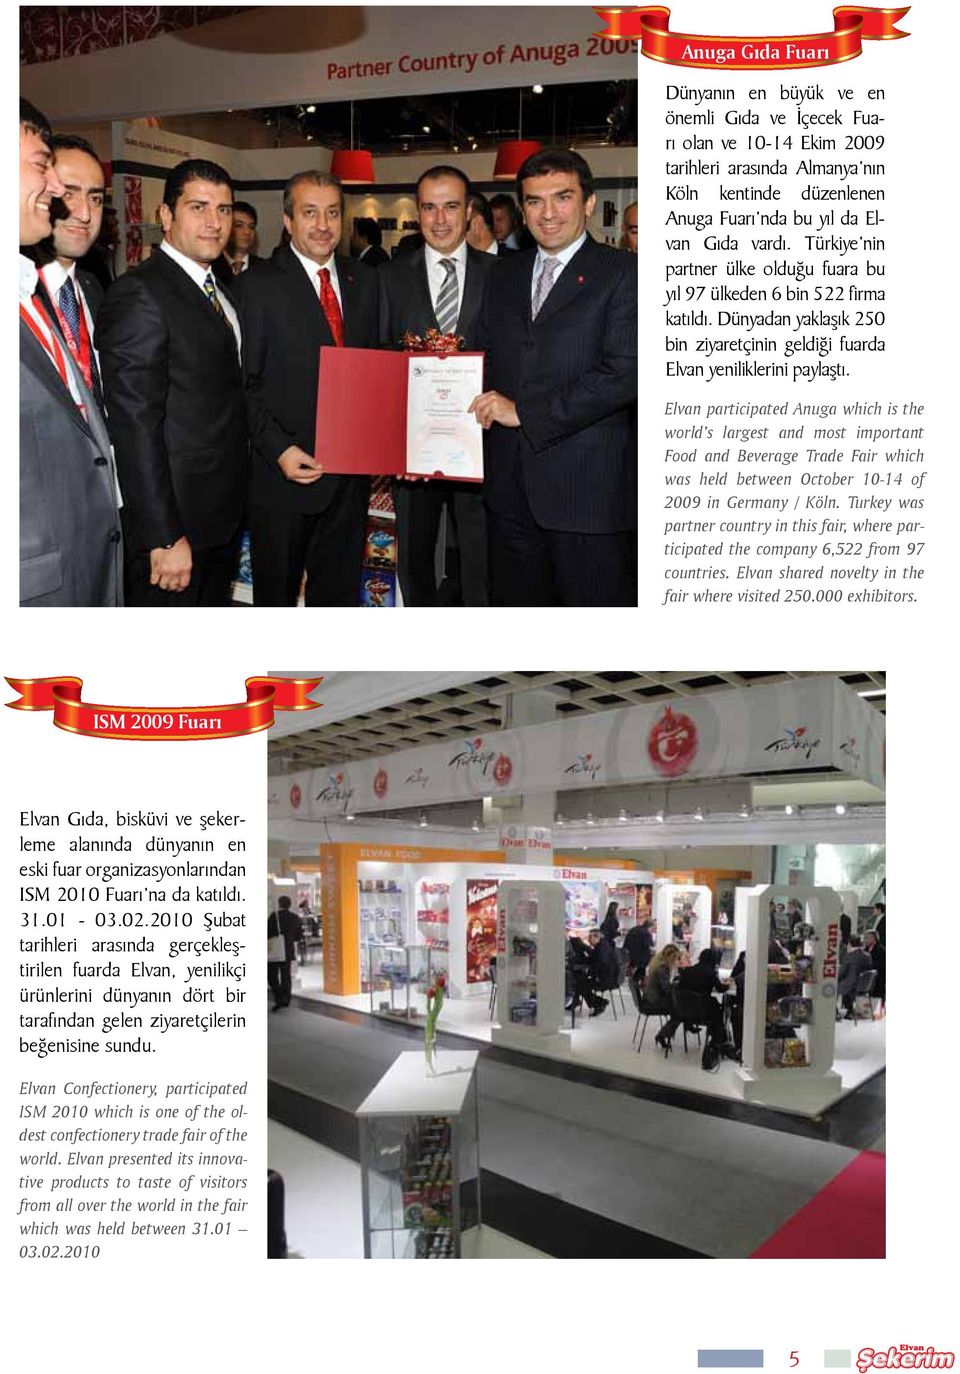 Elvan participated Anuga which is the world s largest and most important Food and Beverage Trade Fair which was held between October 10-14 of 2009 in Germany / Köln.